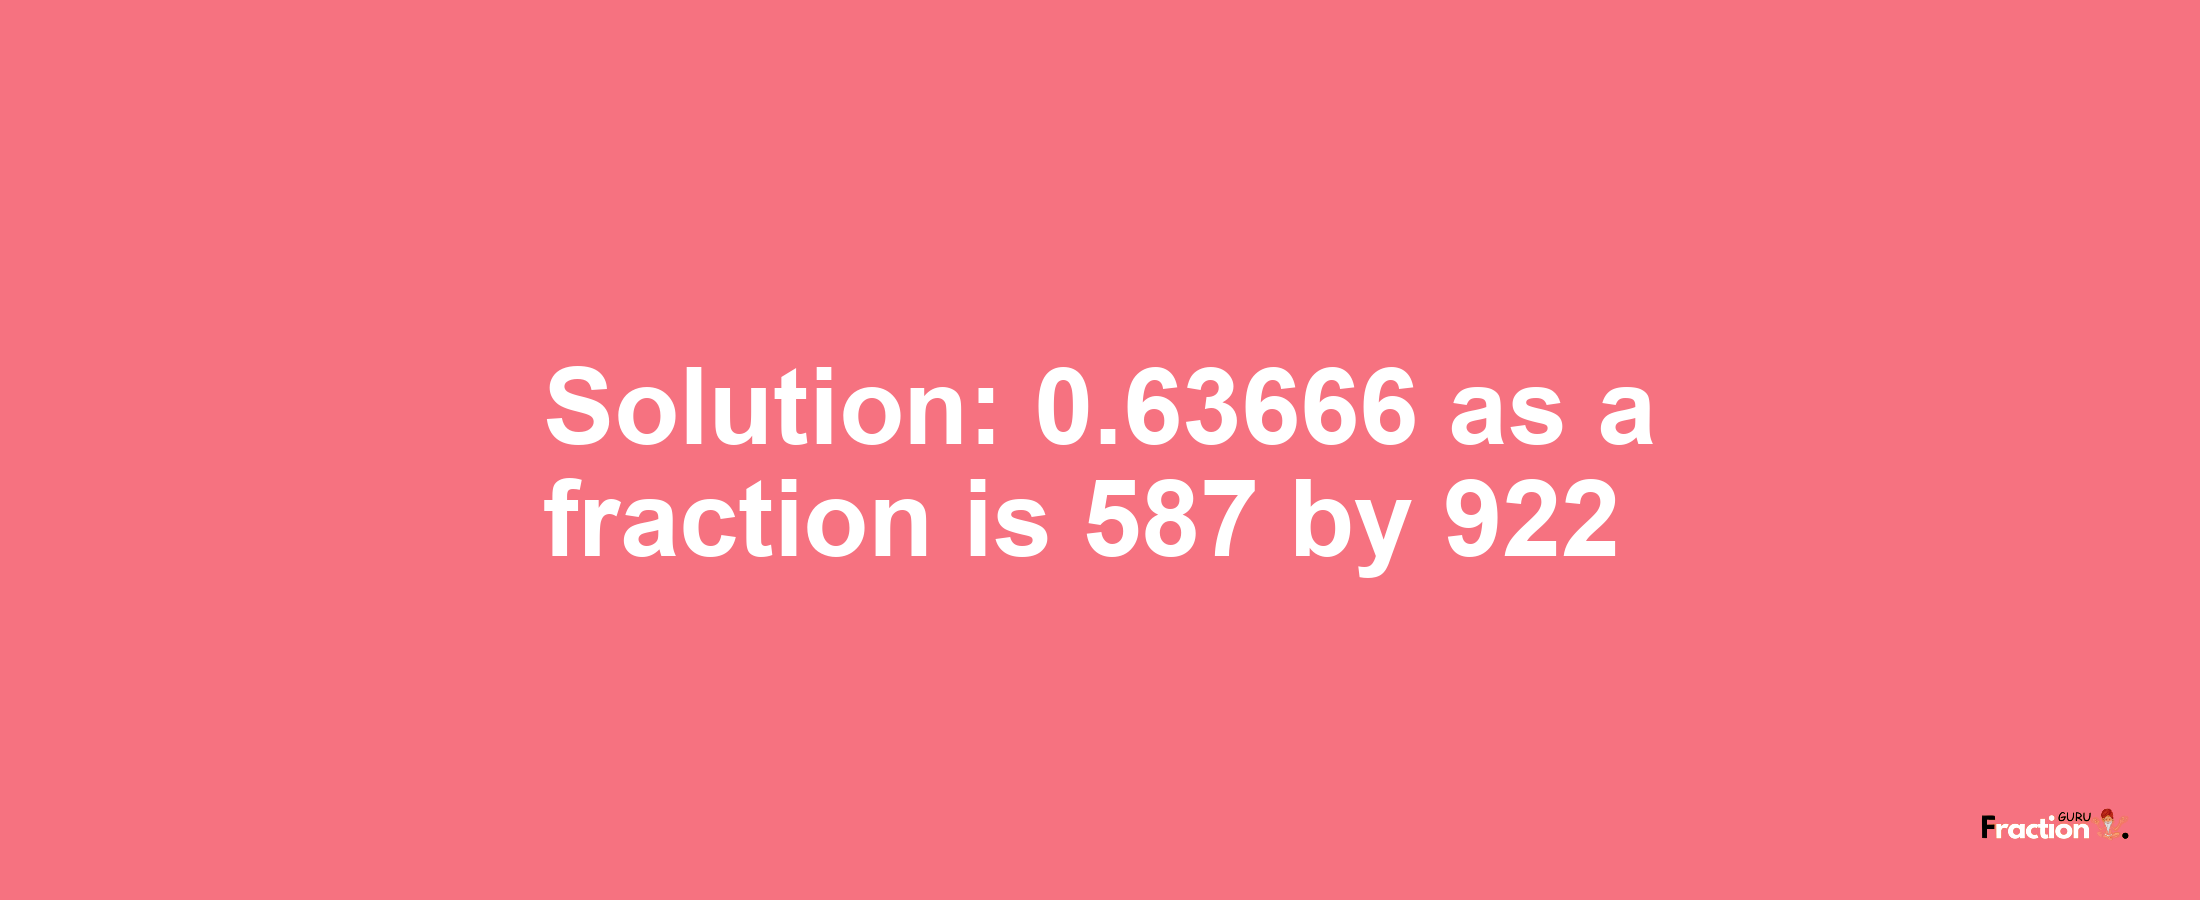 Solution:0.63666 as a fraction is 587/922